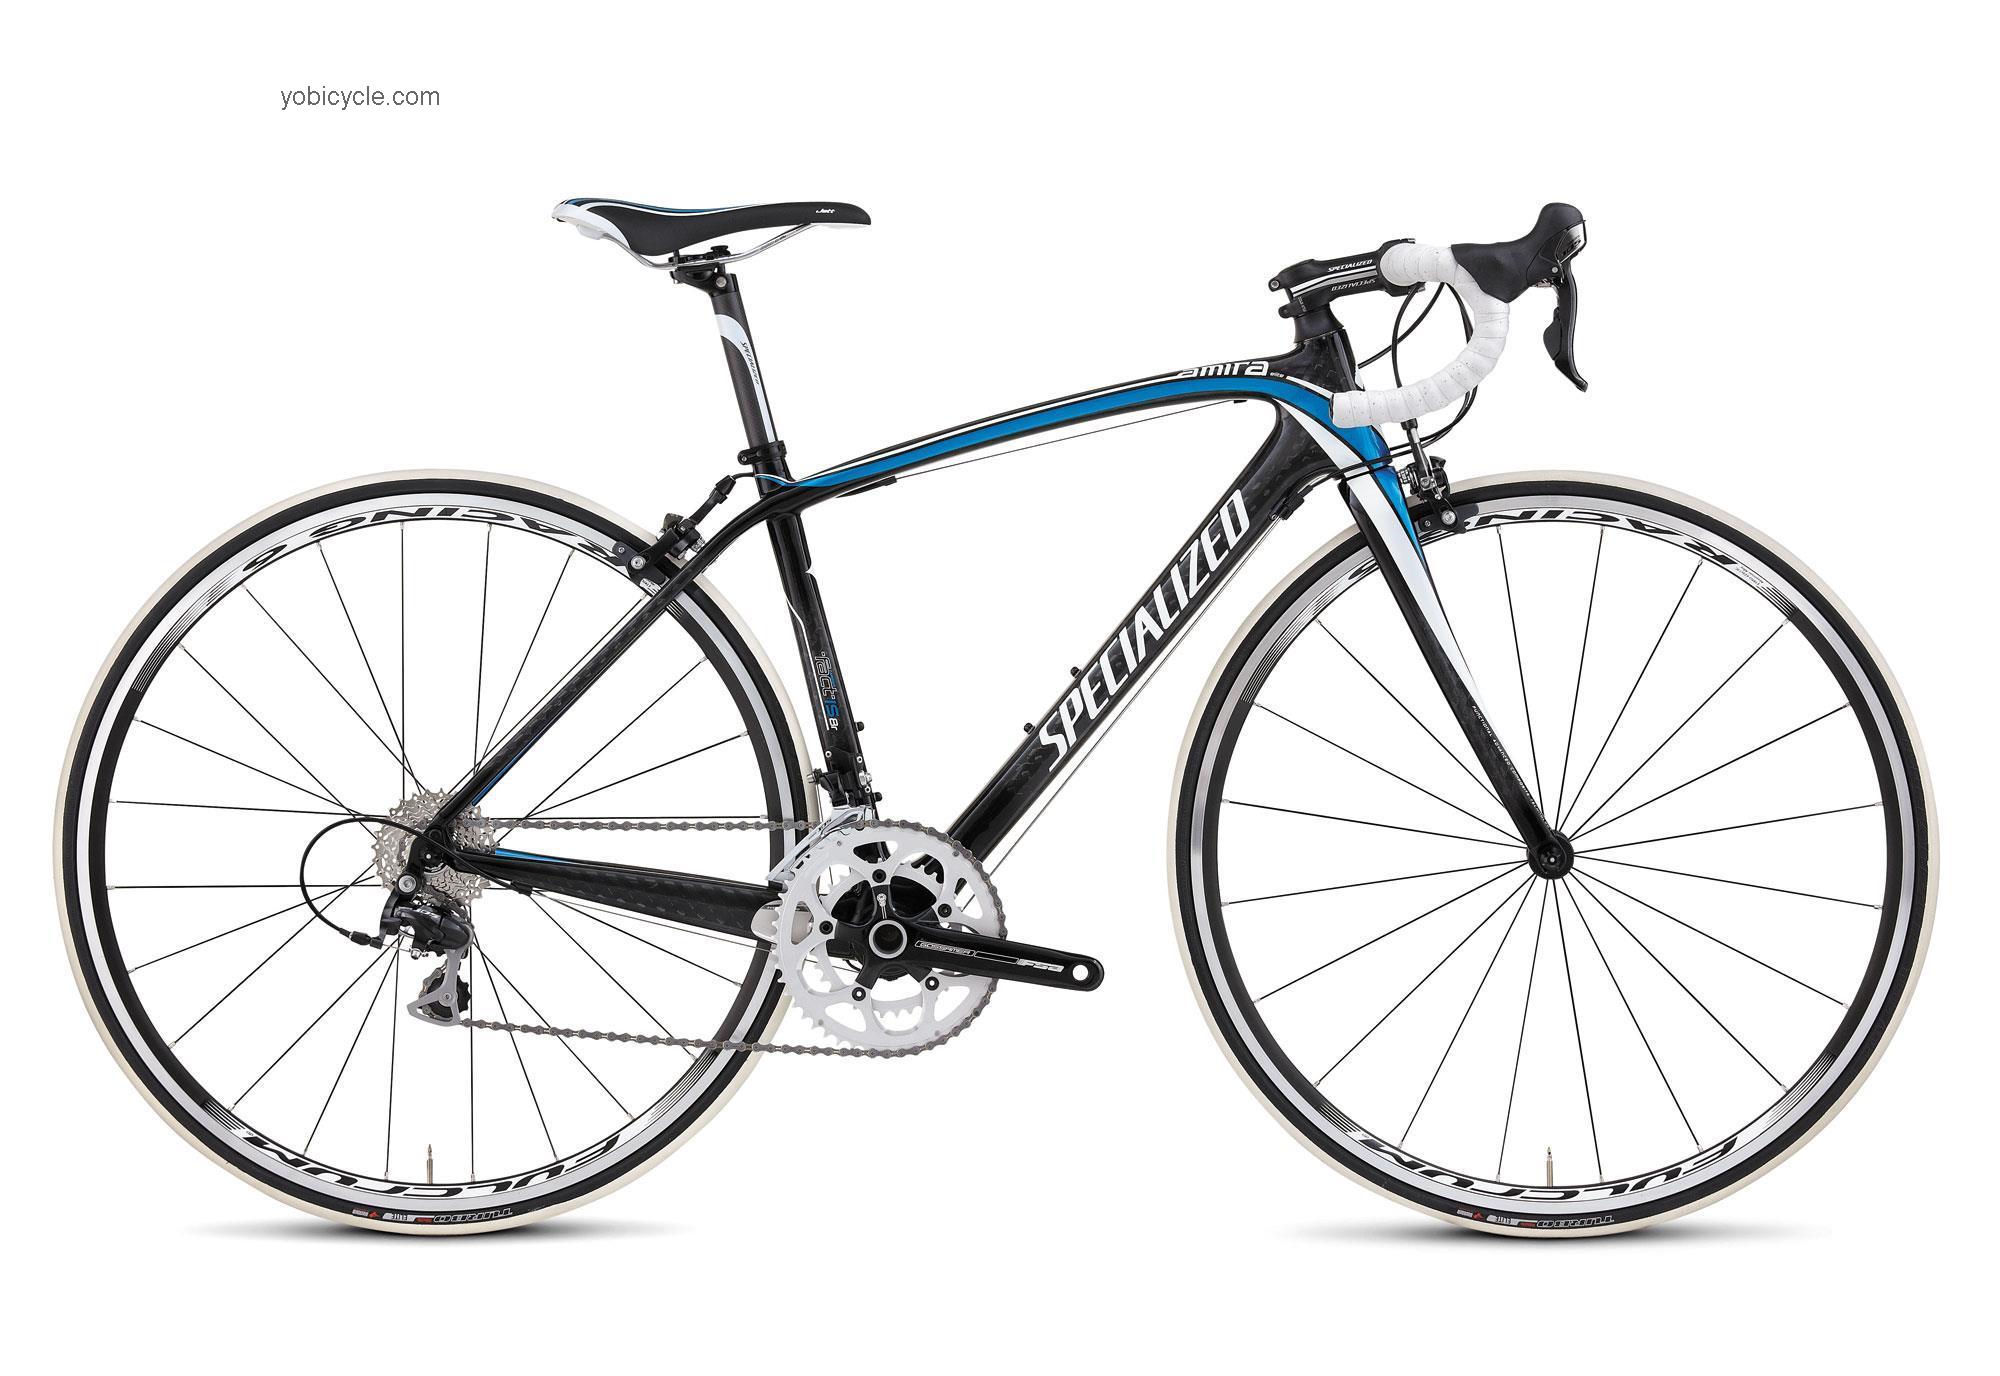 Specialized Amira Elite Compact 2012 comparison online with competitors